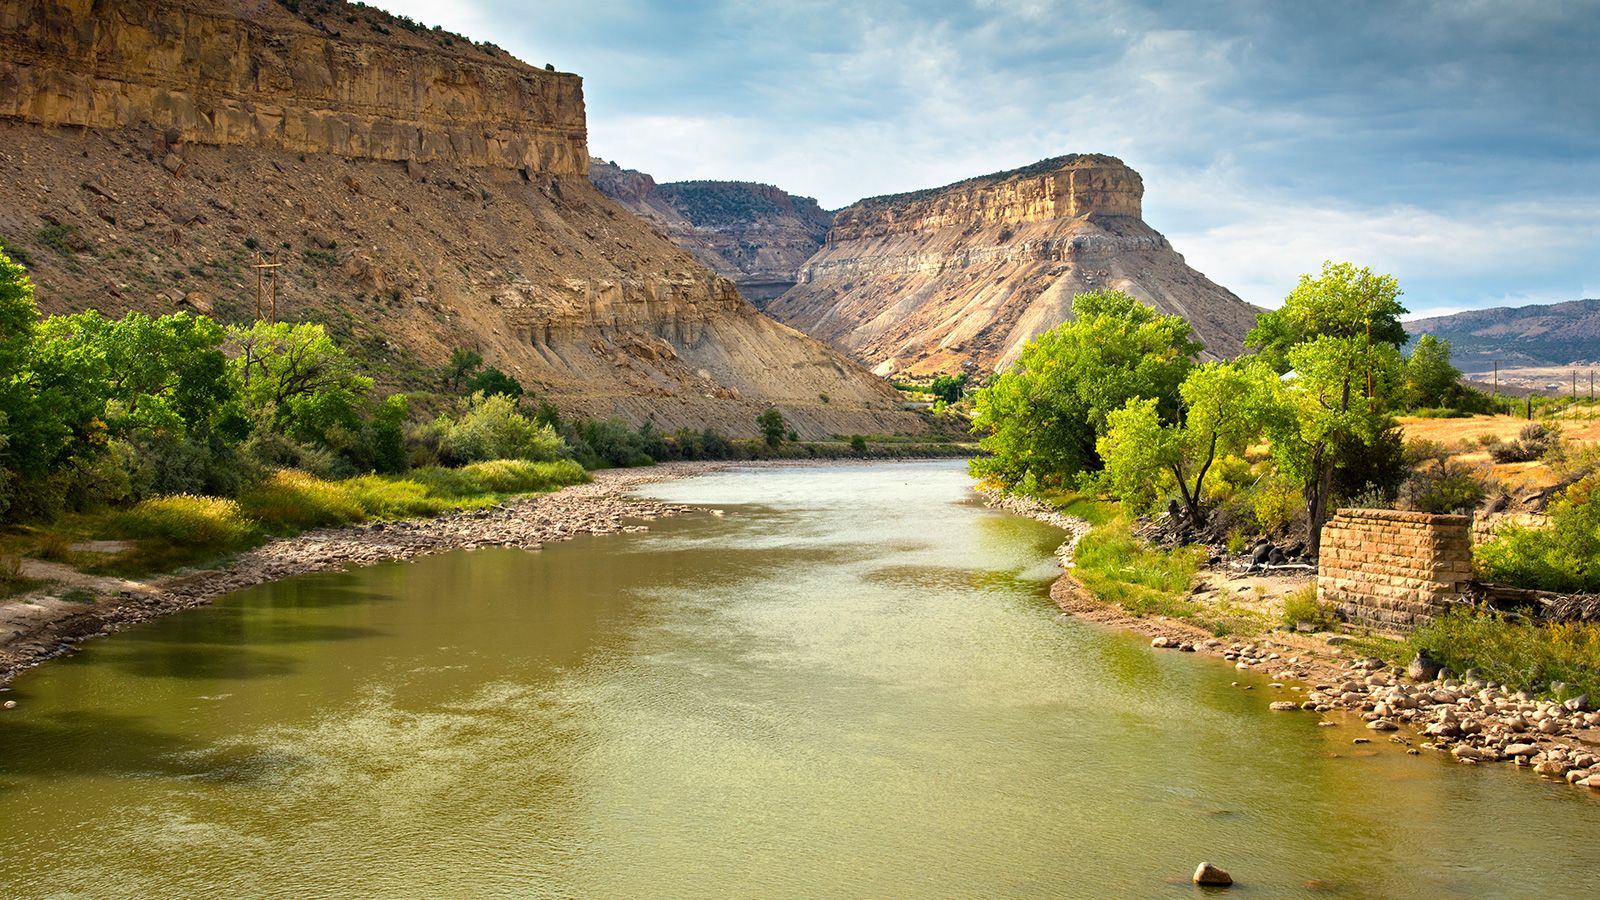 <strong>On the river:</strong> The Colorado River flows through the Grand Valley in western Colorado carving out mesas and buttes.